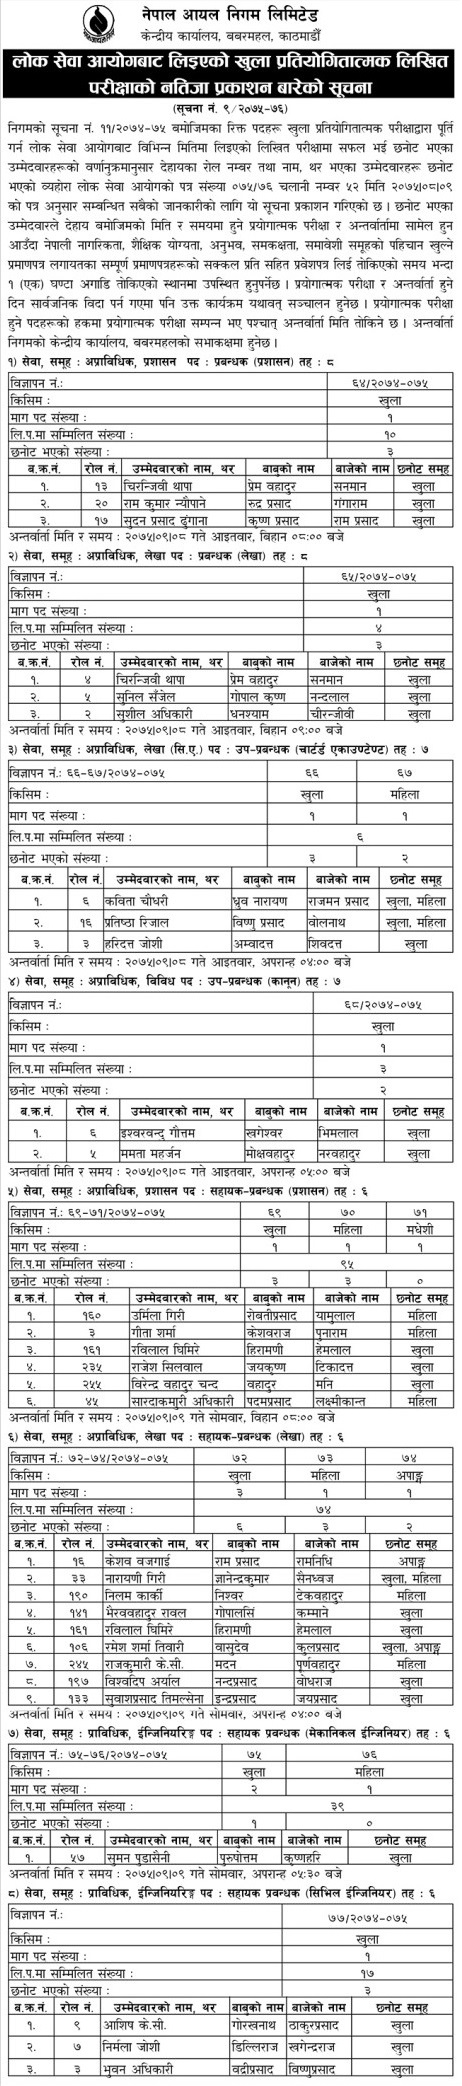 Nepal Oil Corporation Limited Result 1